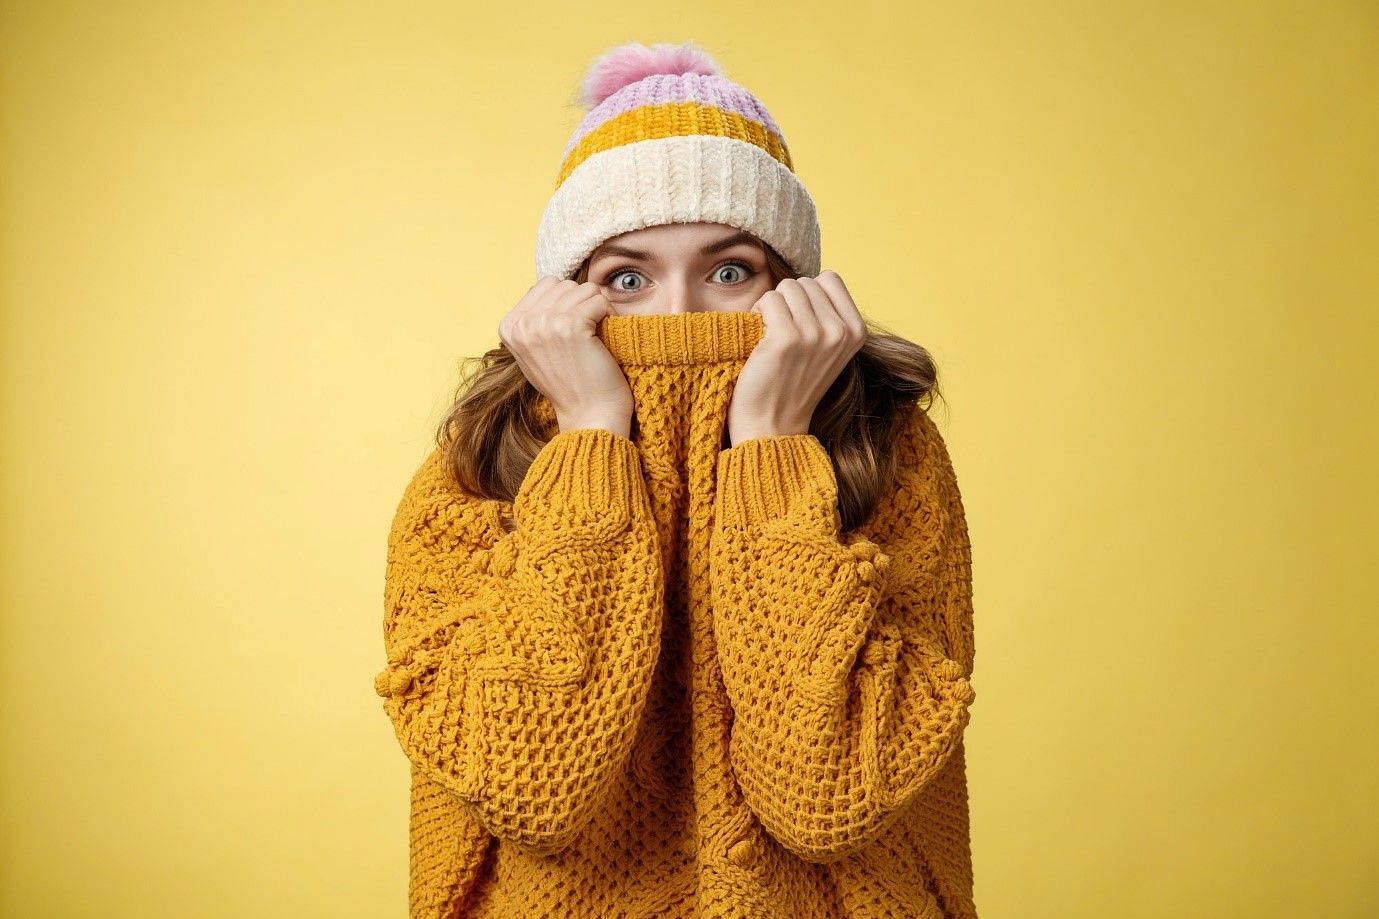 Getting Sick in Cold Weather - What are the Ways to Prevent it?